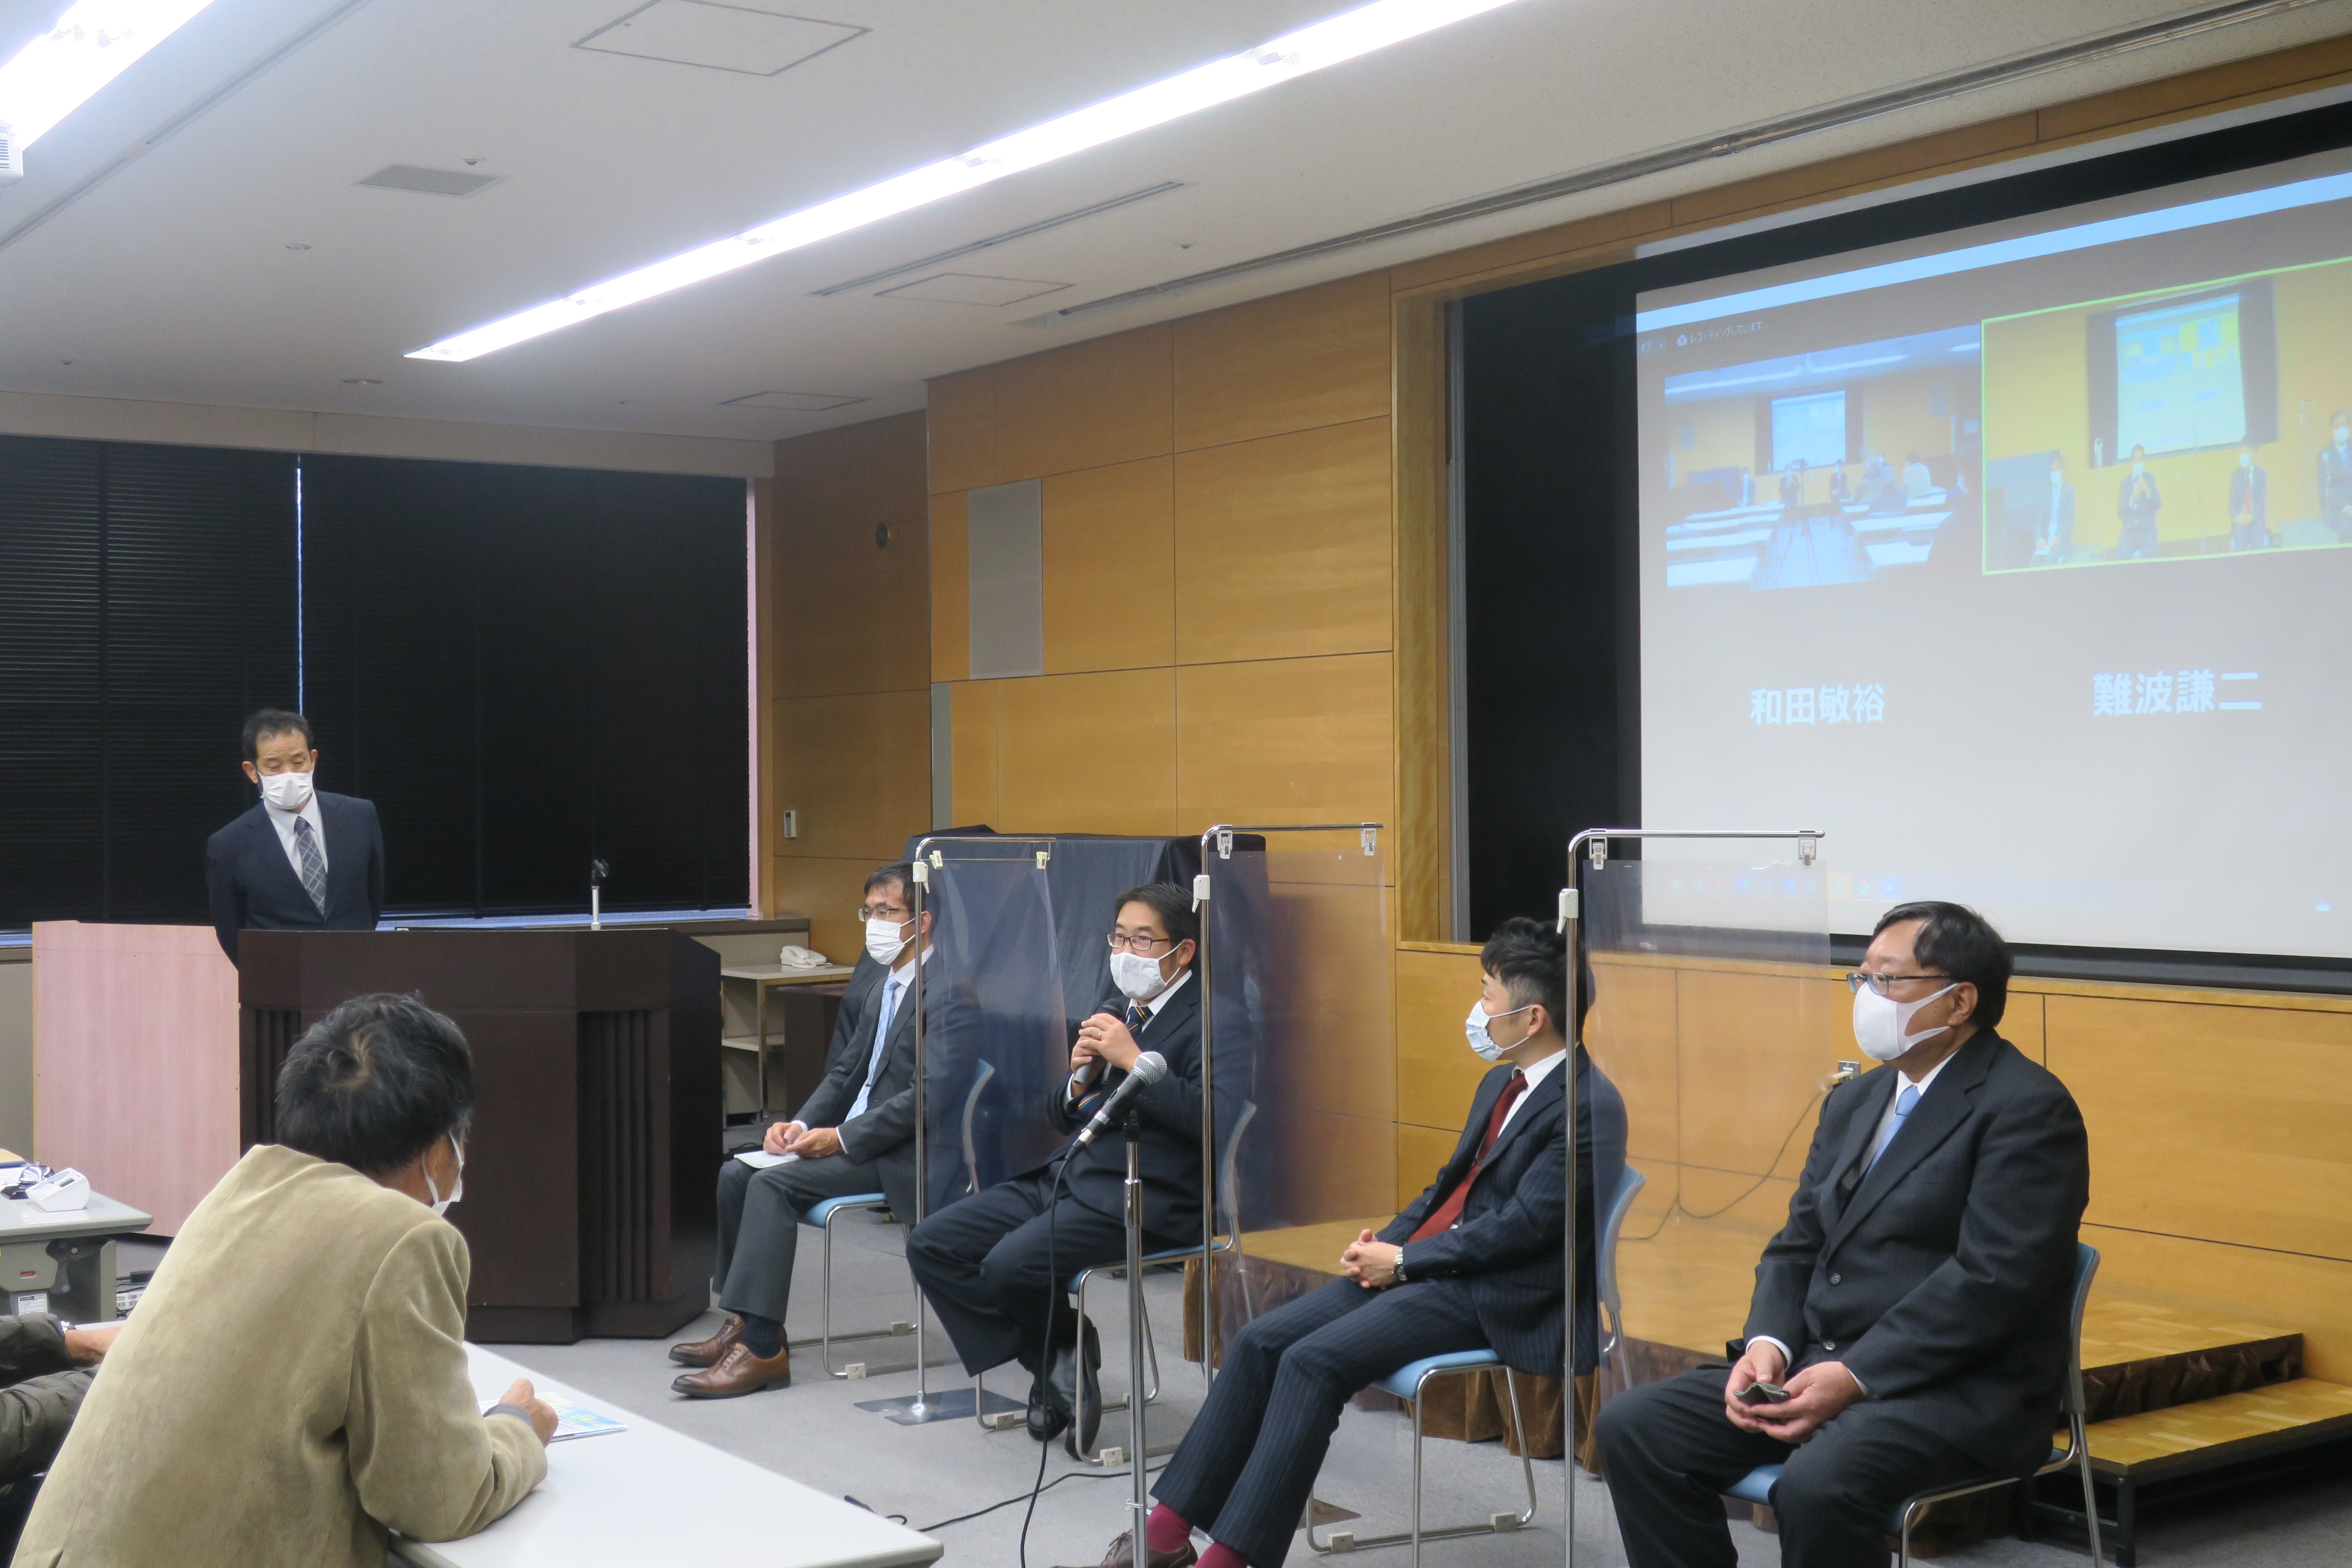 ④Participants and speakers having s discussion.